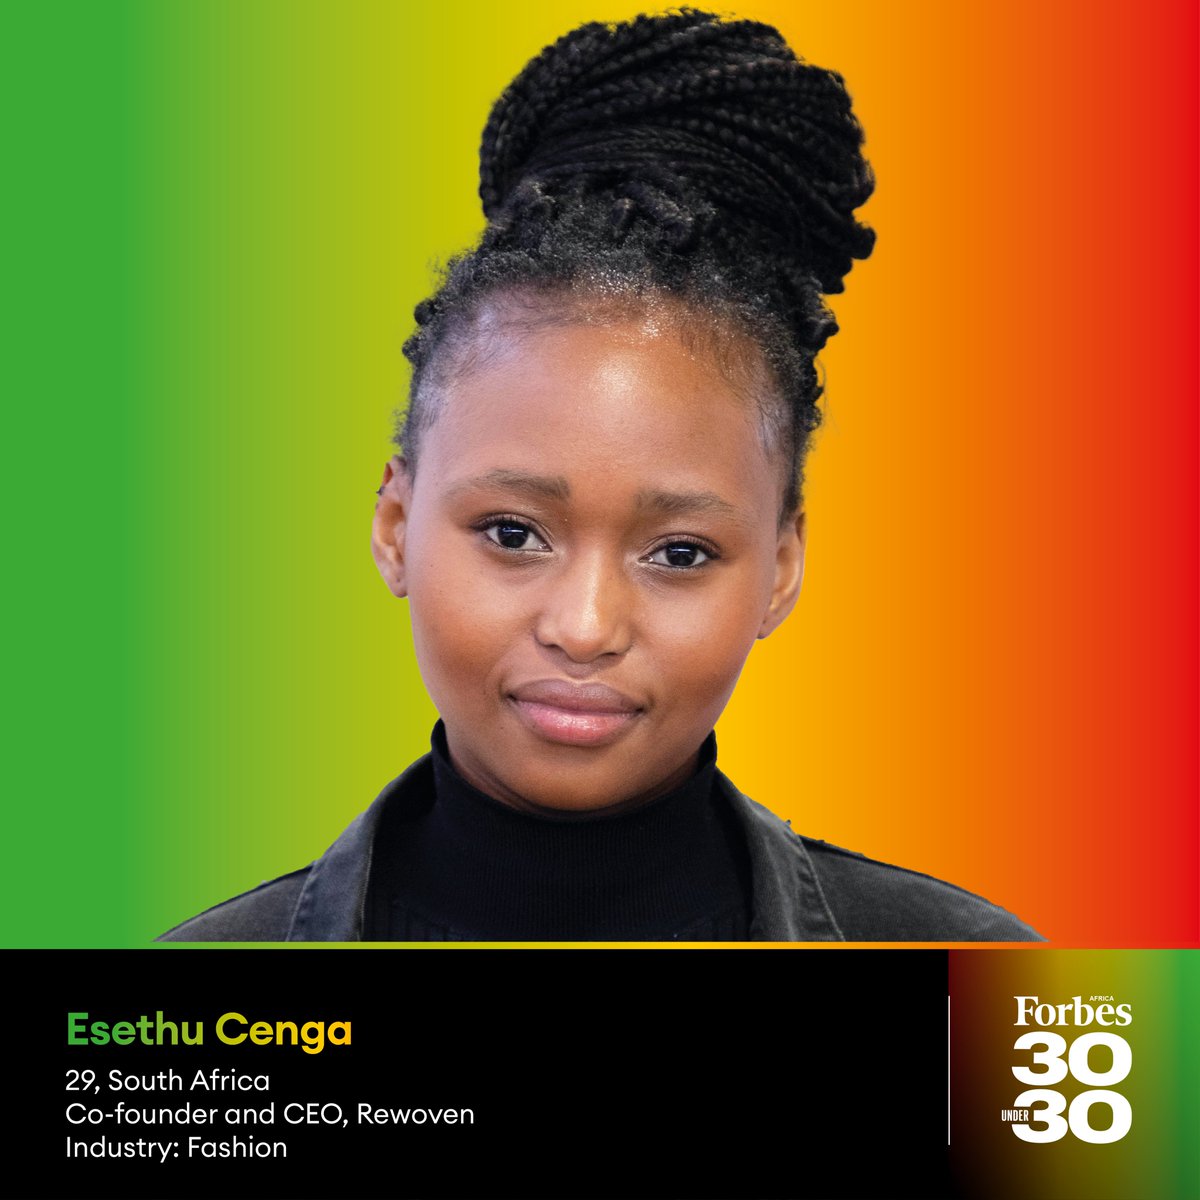 #ADecadeofUnder30
'I am a development economist by qualification, [so] a lot of how I see the world is informed by that perspective; a passion for understanding how we can create a world where everyone can live a life of dignity,” says Cenga.

“This passion drives me to be very…